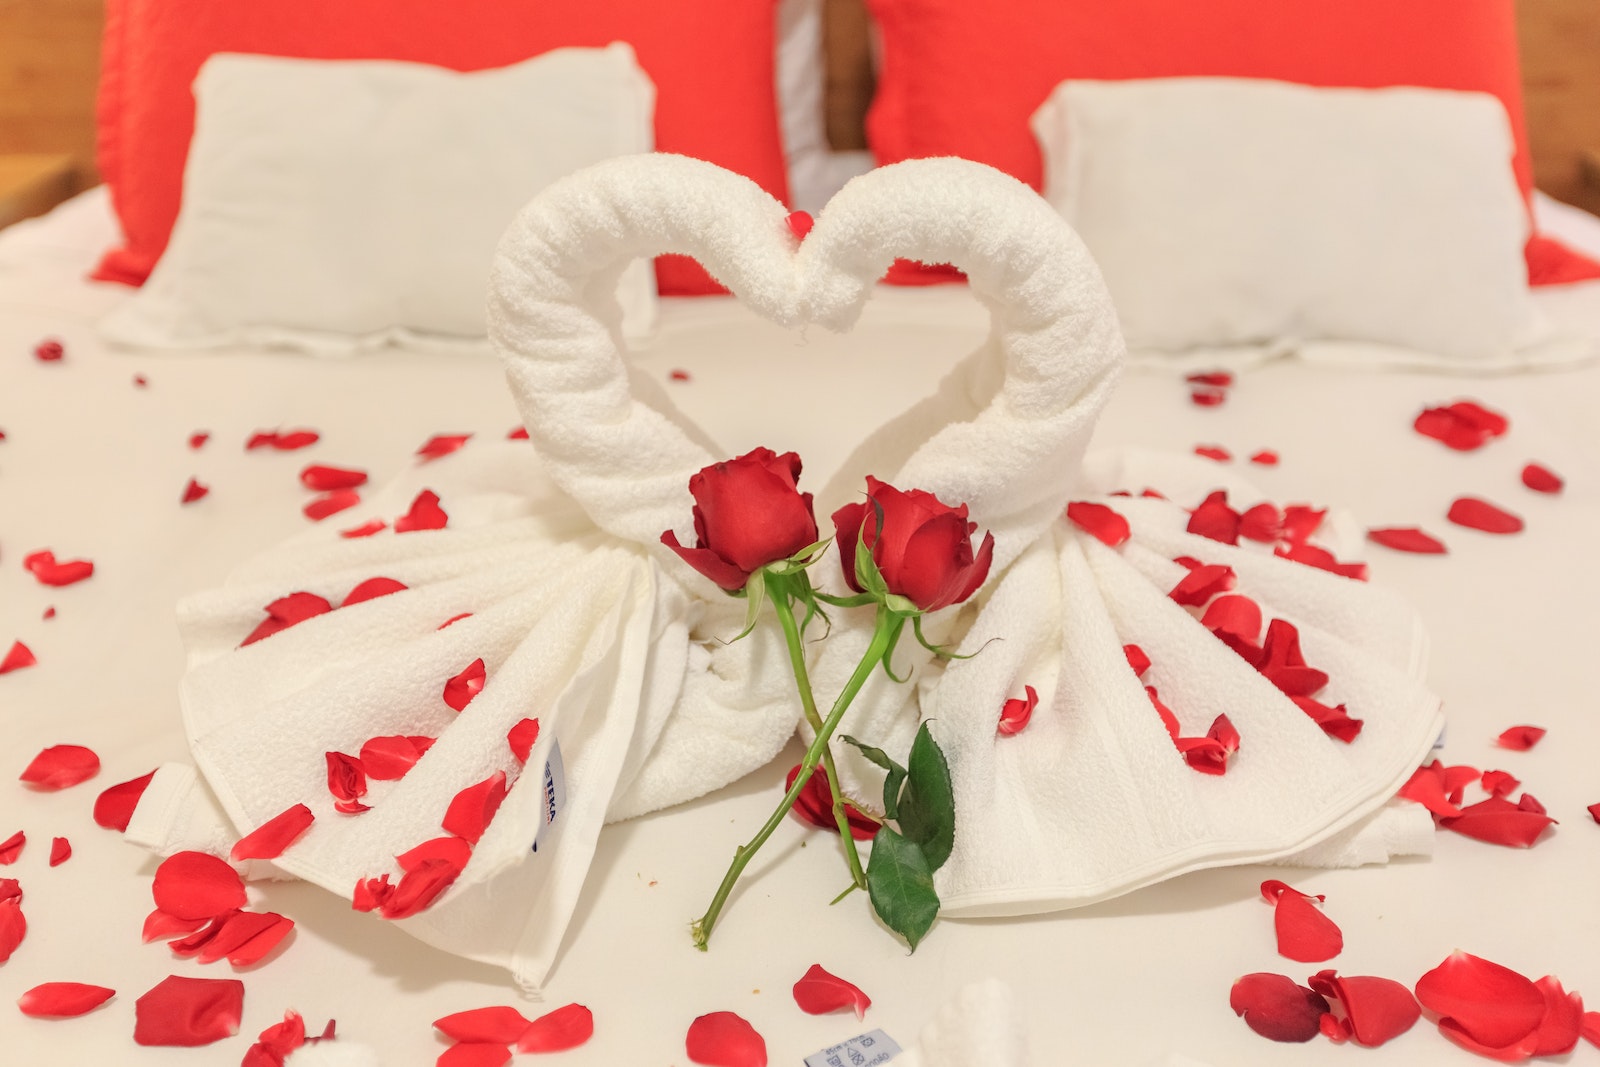 Red Roses and Bath Towels on a Bed